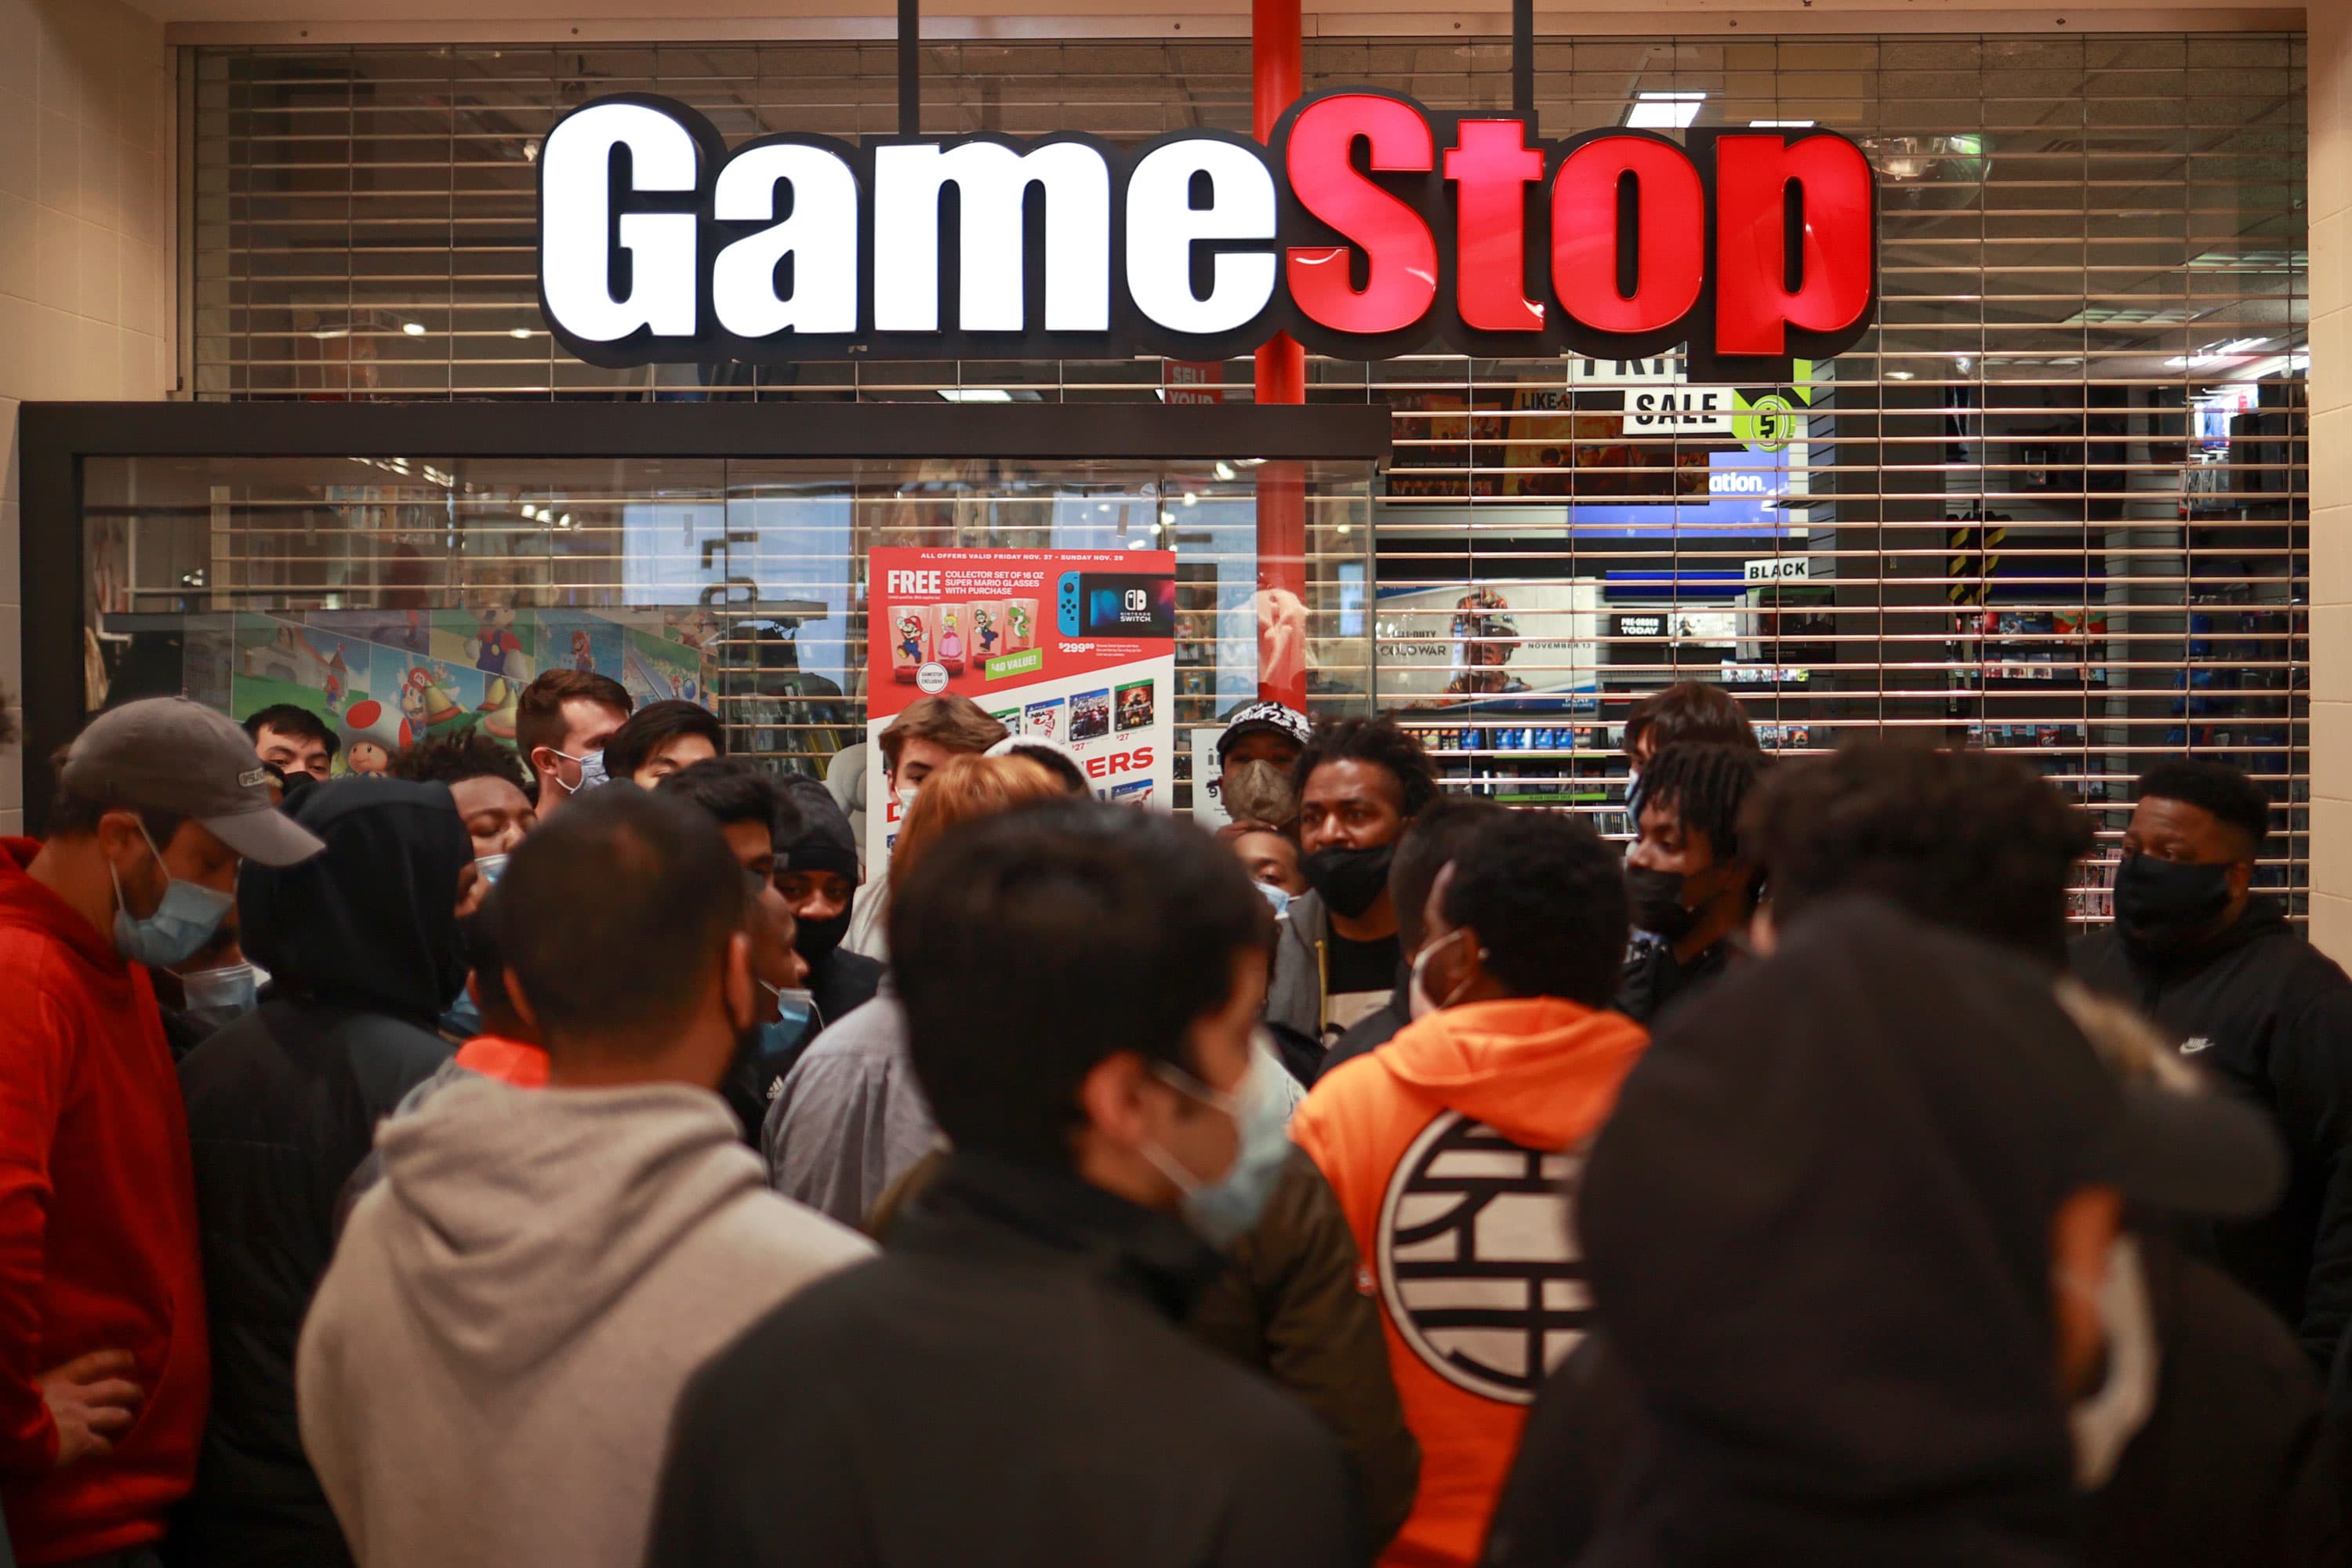 GameStop shares rise after the CEO resigns, “Roaring Kitty” raises the stakes